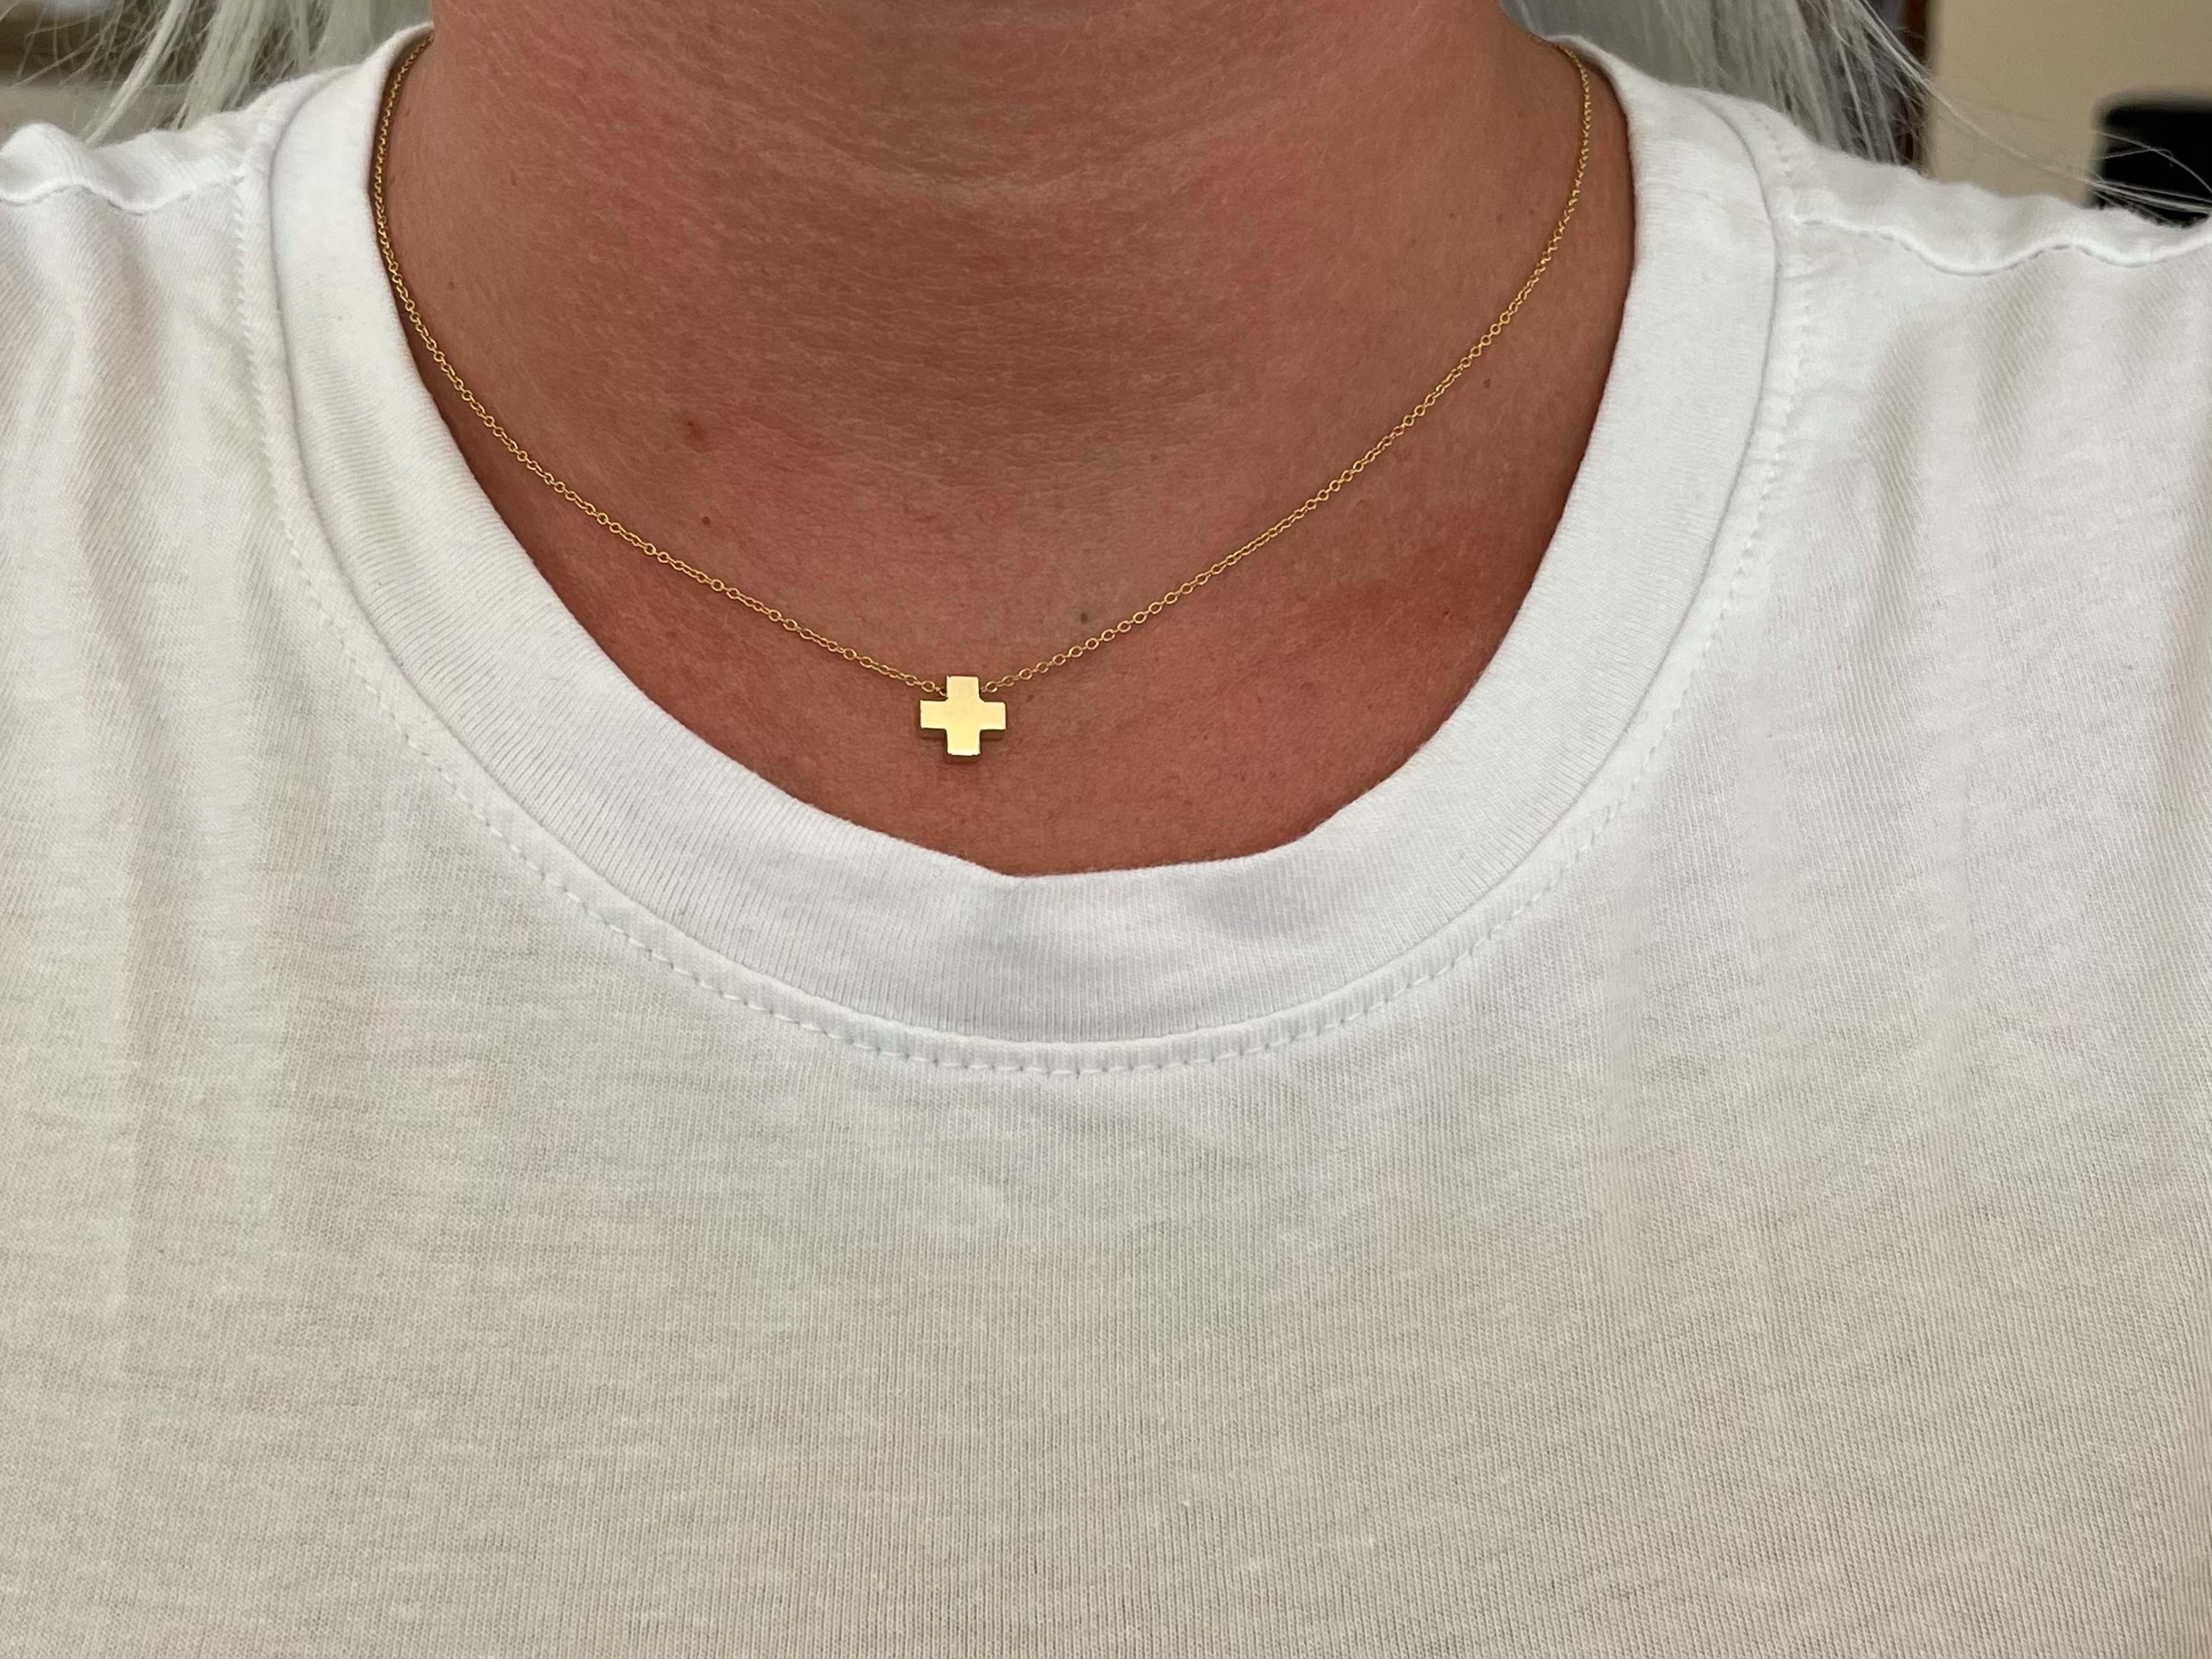 This cross pendant necklace is an ageless classic design by Tiffany & Co. This pendant and chain is richly crafted in 18k yellow gold. The pendant measures 8.16 mm in diameter and comes on a 16 inch Tiffany & Co. Rolo link chain. Altogether the